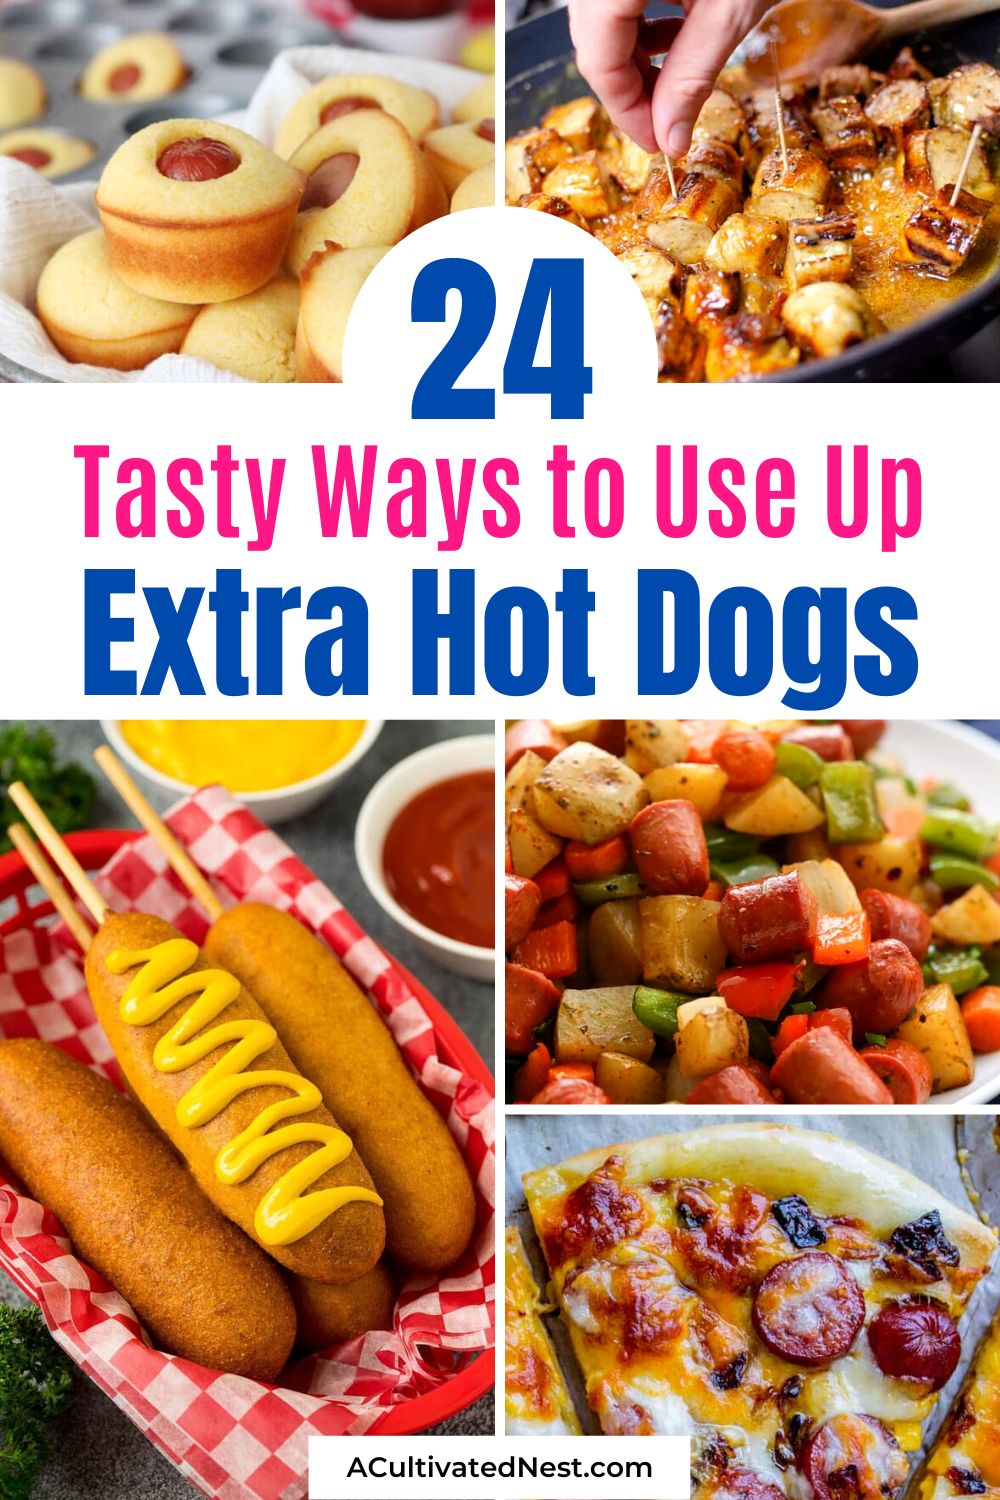 24 Tasty Recipes Using Leftover Hot Dogs- If you don't know what to do with the hot dogs left over from your cookout, here are many tasty recipes using leftover hot dogs! | #recipes #hotDogs #recipeIdeas #dinnerRecipes #ACultivatedNest